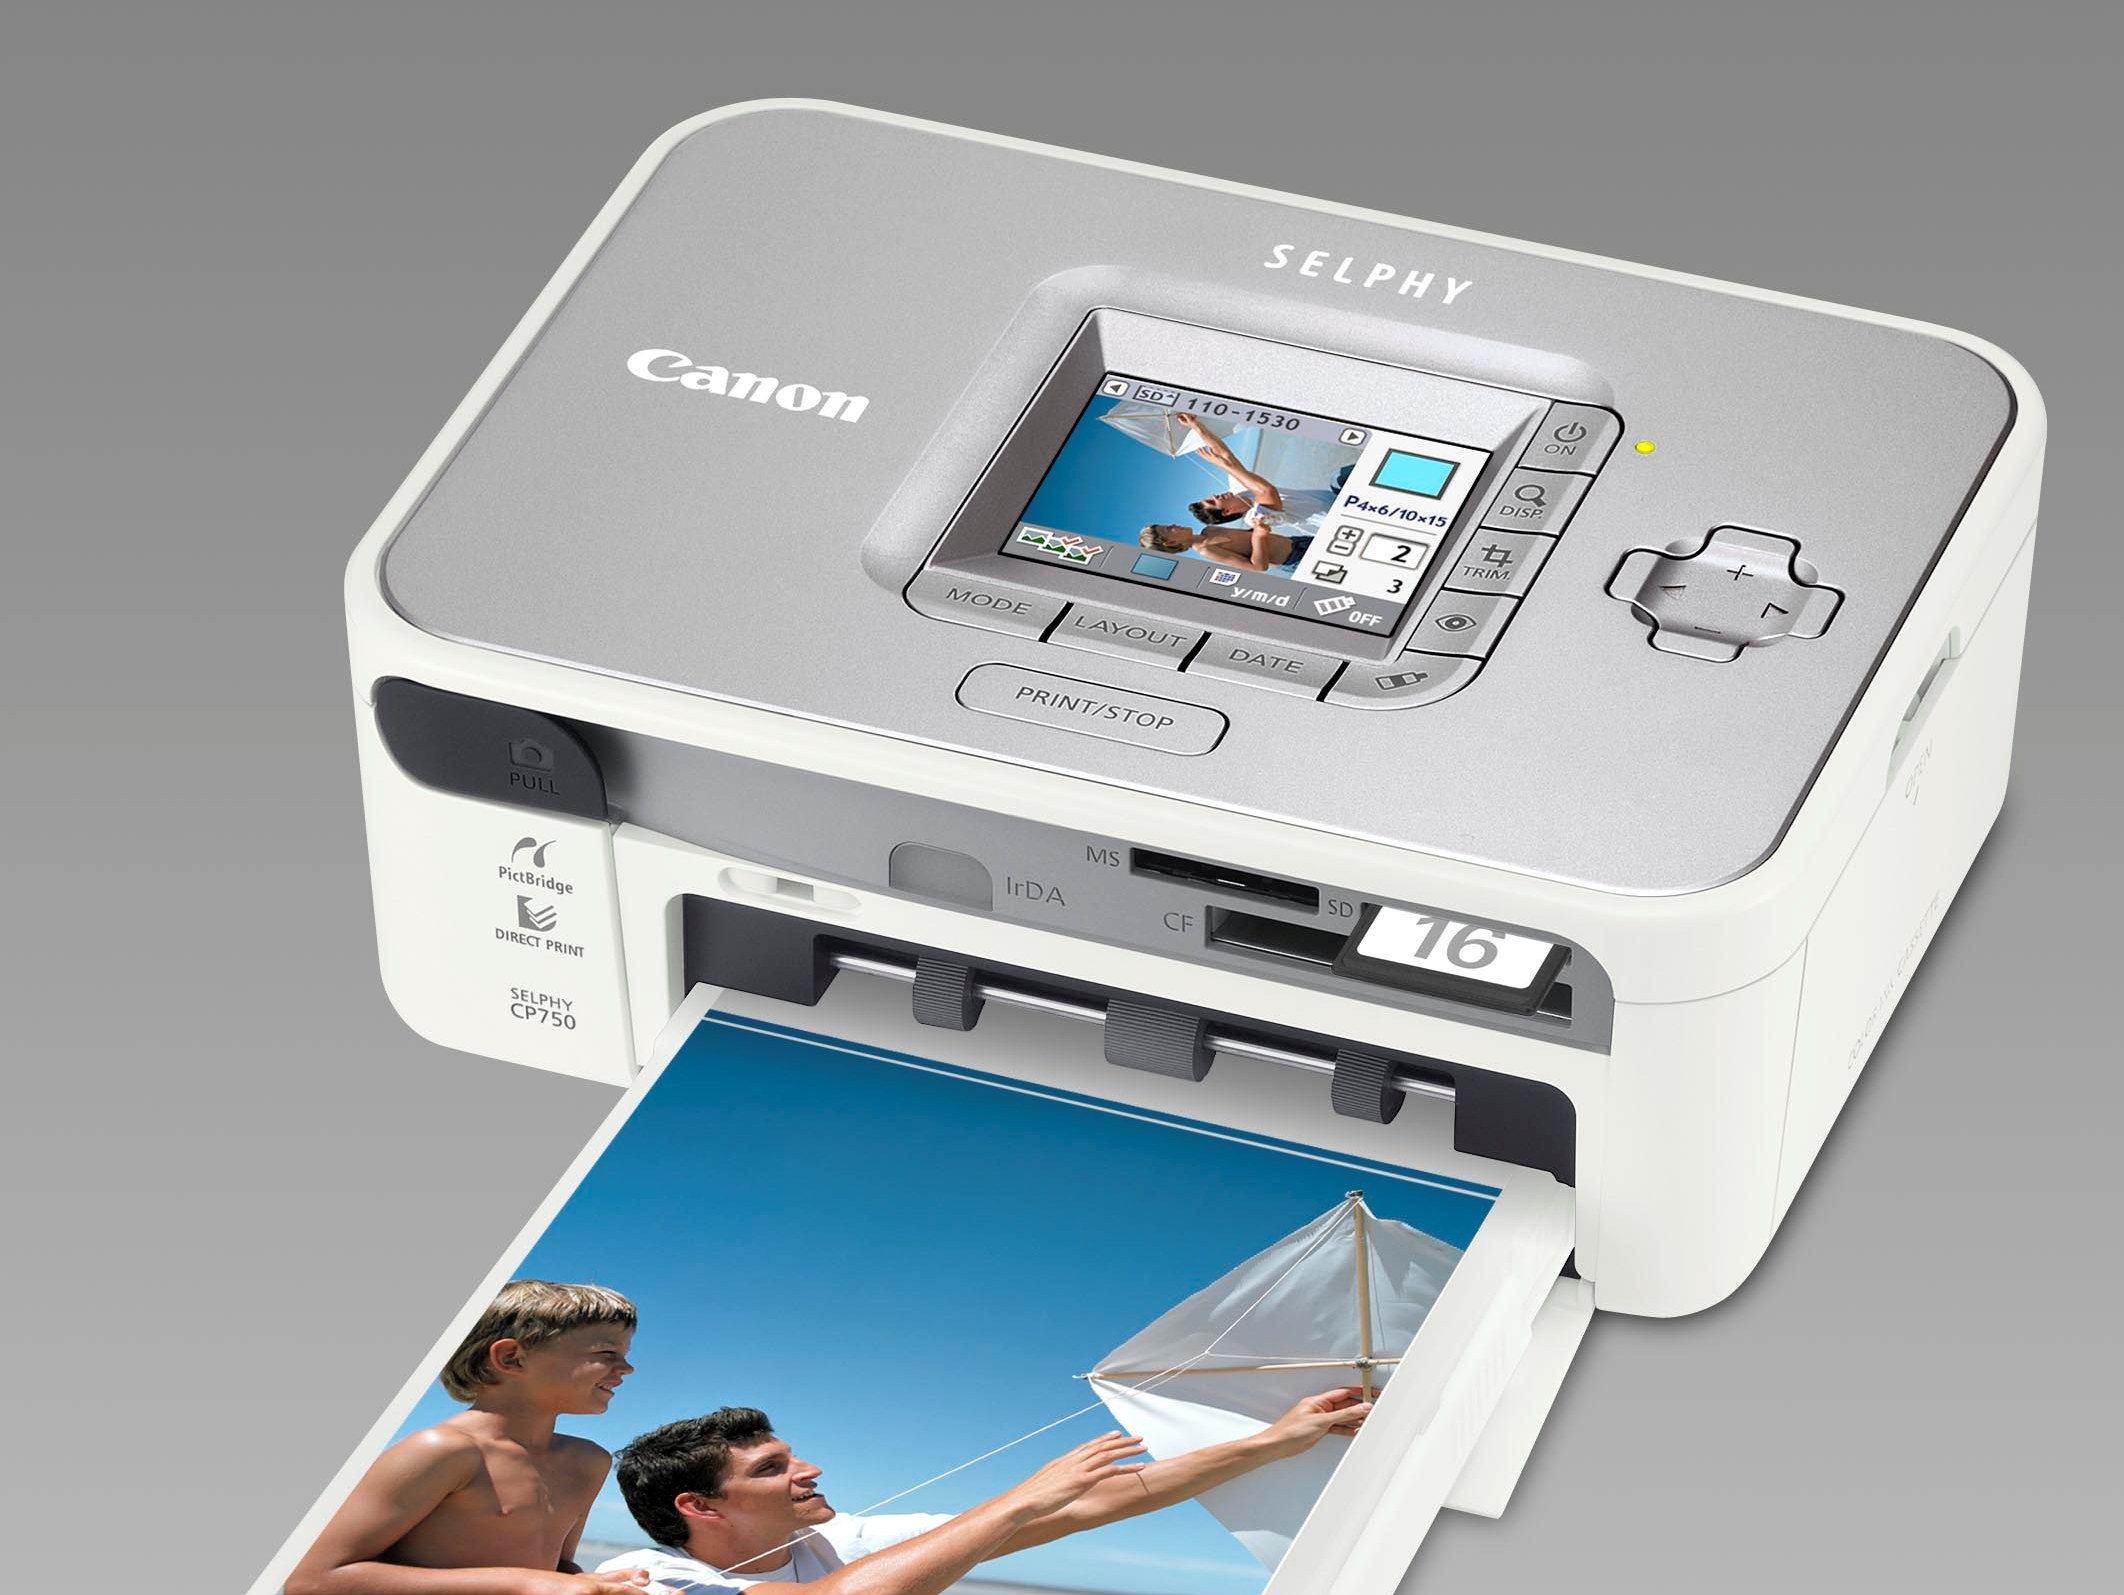 New Selphy photo printers don't need a TechRadar